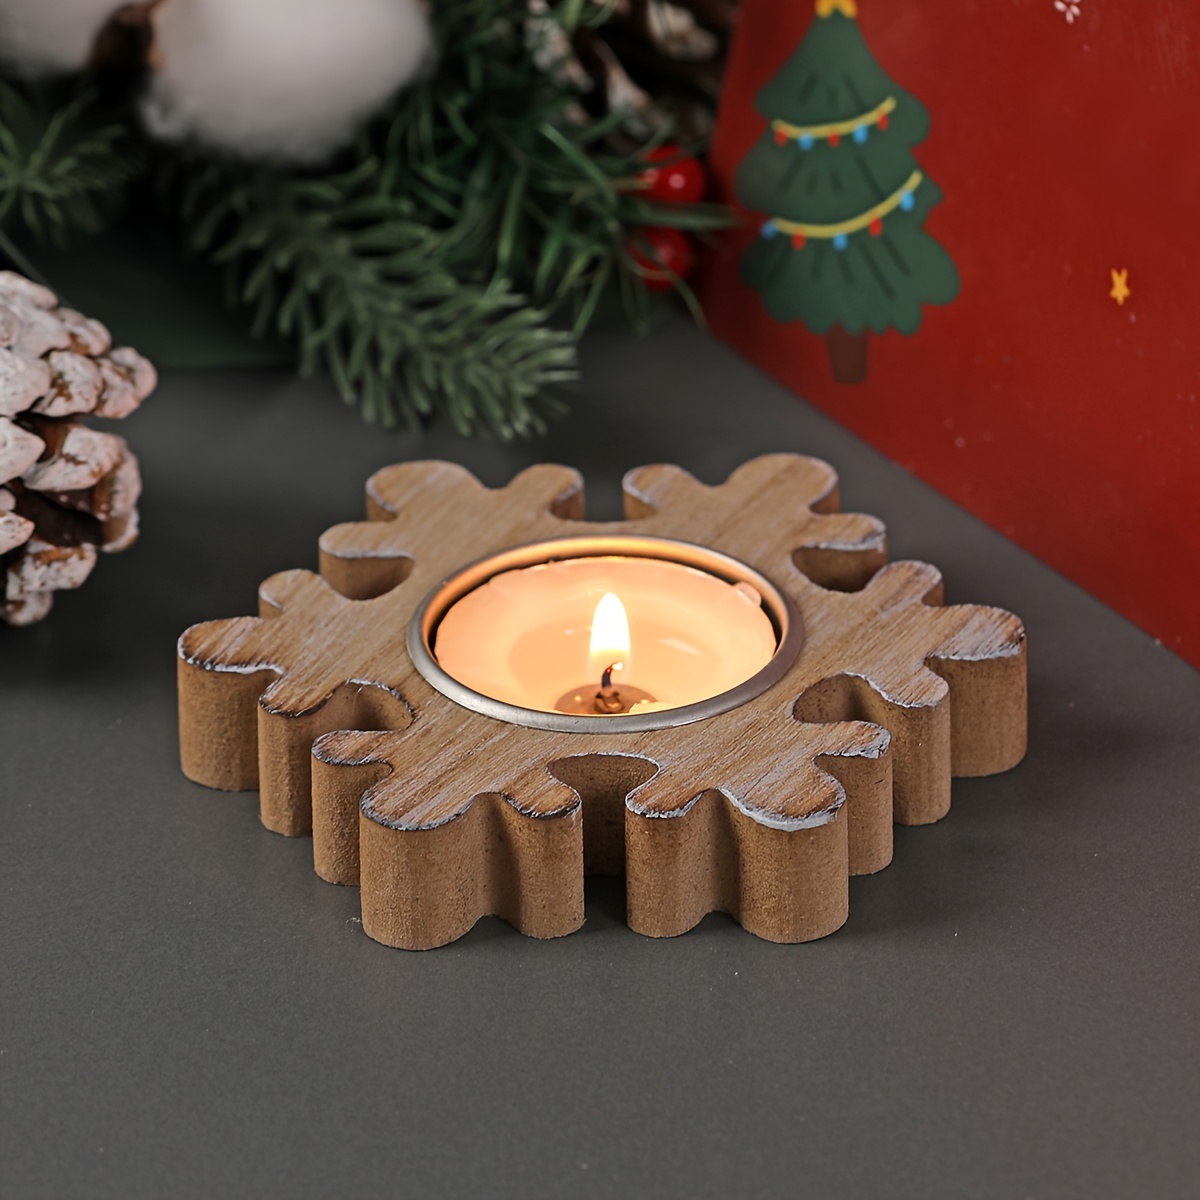 Wooden Candle Holder,Hollowed-out Heart Wood Tealight Candles Holders,  Romantic Decorative Heart Pedestal Candle Holder Ornament for Girlfriend  Valentine'Day Gifts Home Holiday Festival Decoration 